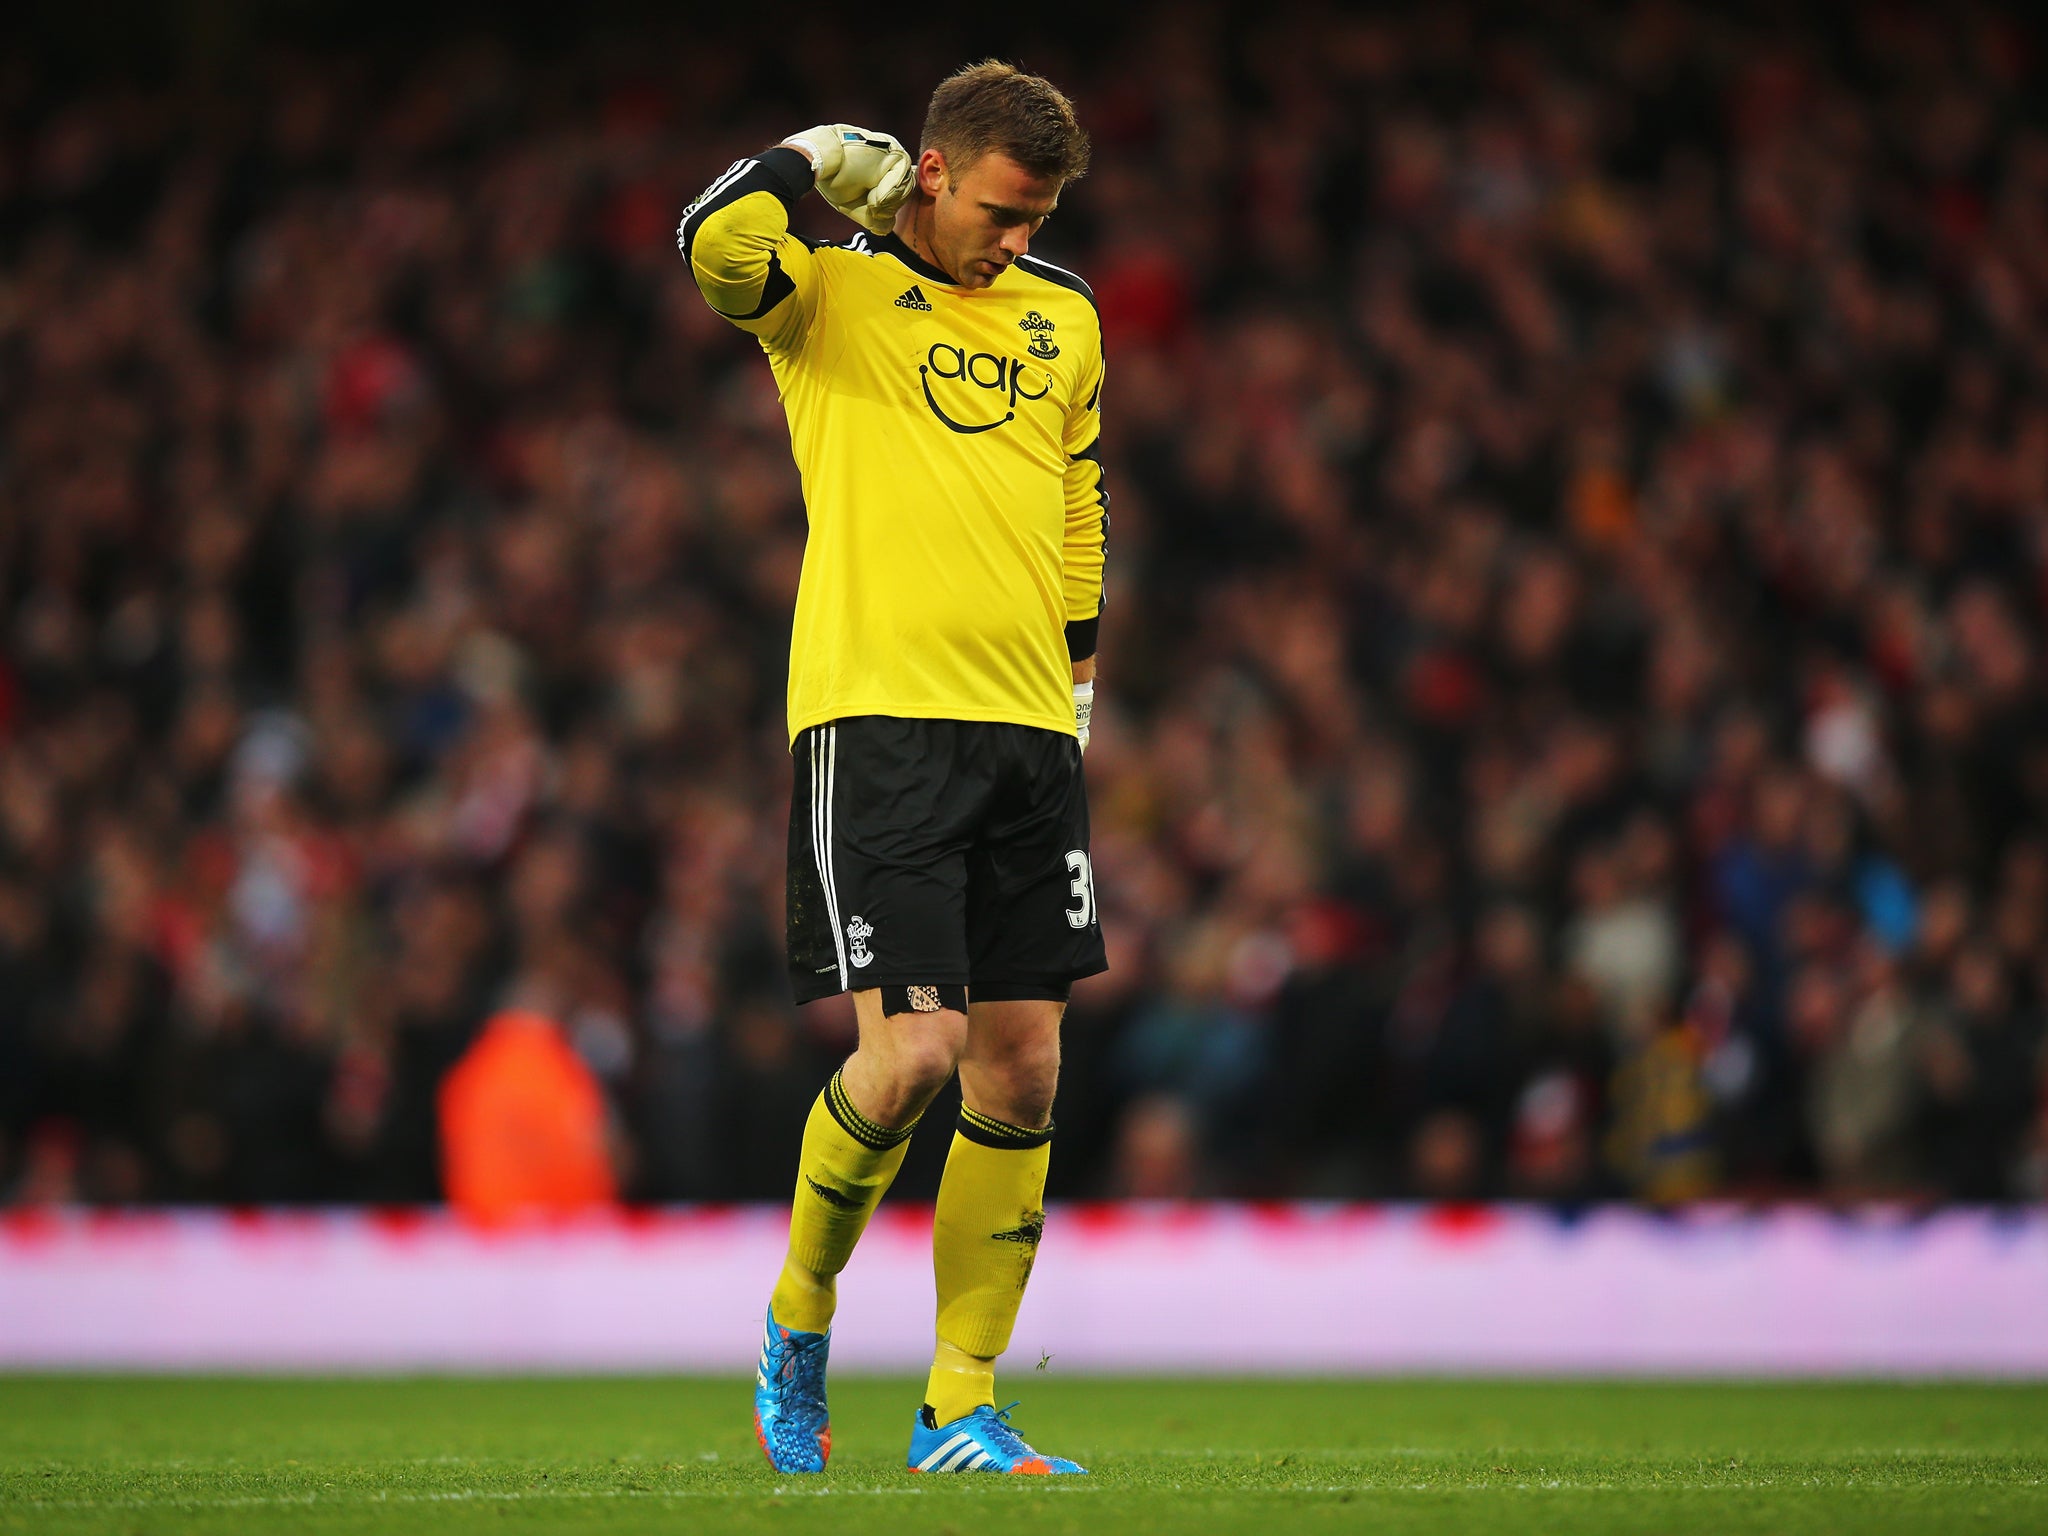 Southampton goalkeeper Artur Boruc faces a spell on the sidelines after suffering a broken hand in the 3-1 defeat to Chelsea